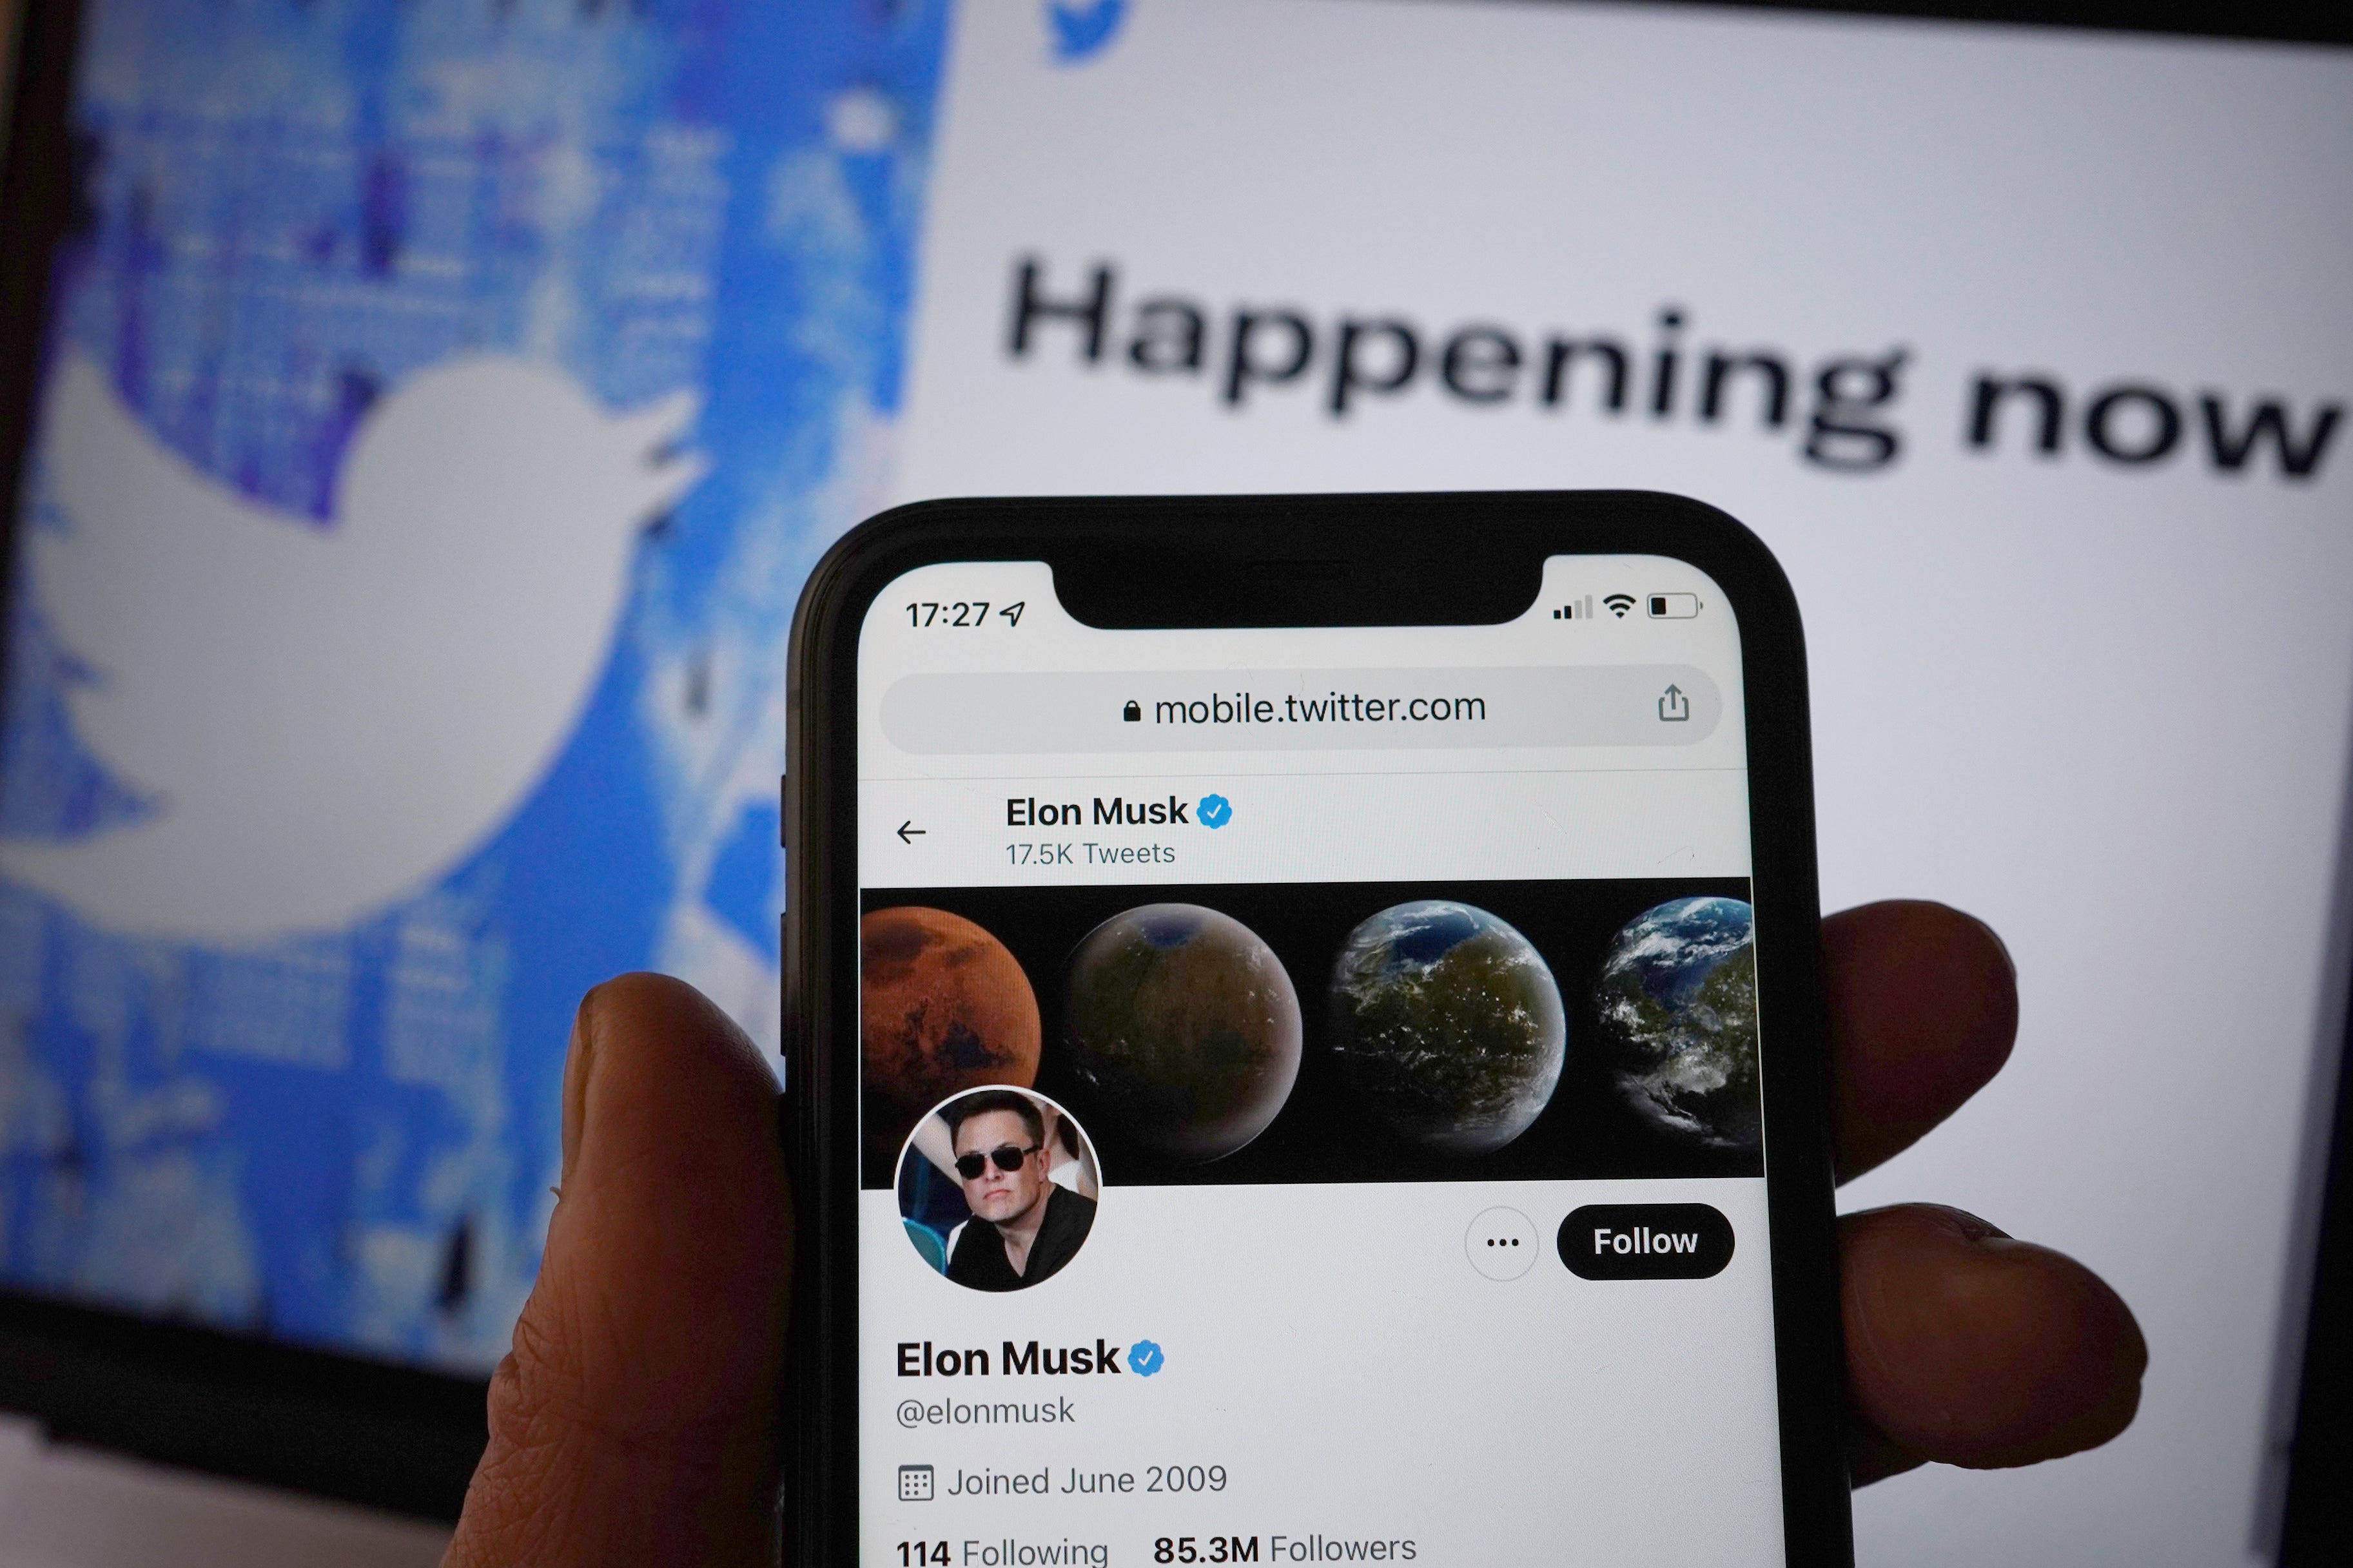 On 1 April, Twitter will begin removing its legacy verification ticks